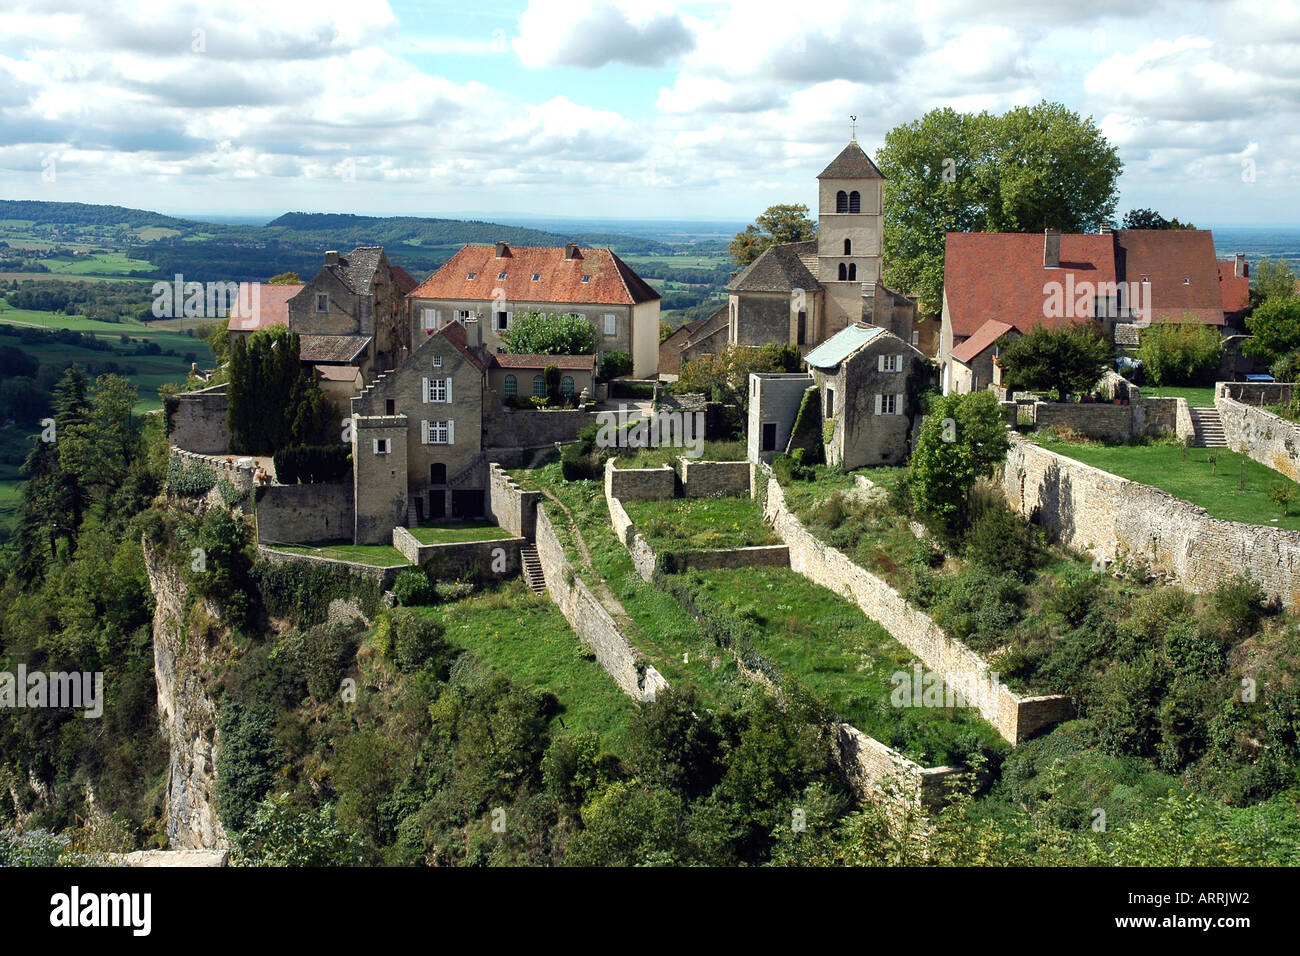 Château-Chalon, a beguiling winemaking village near Arbois high above vineyards in France's Jura region Stock Photo